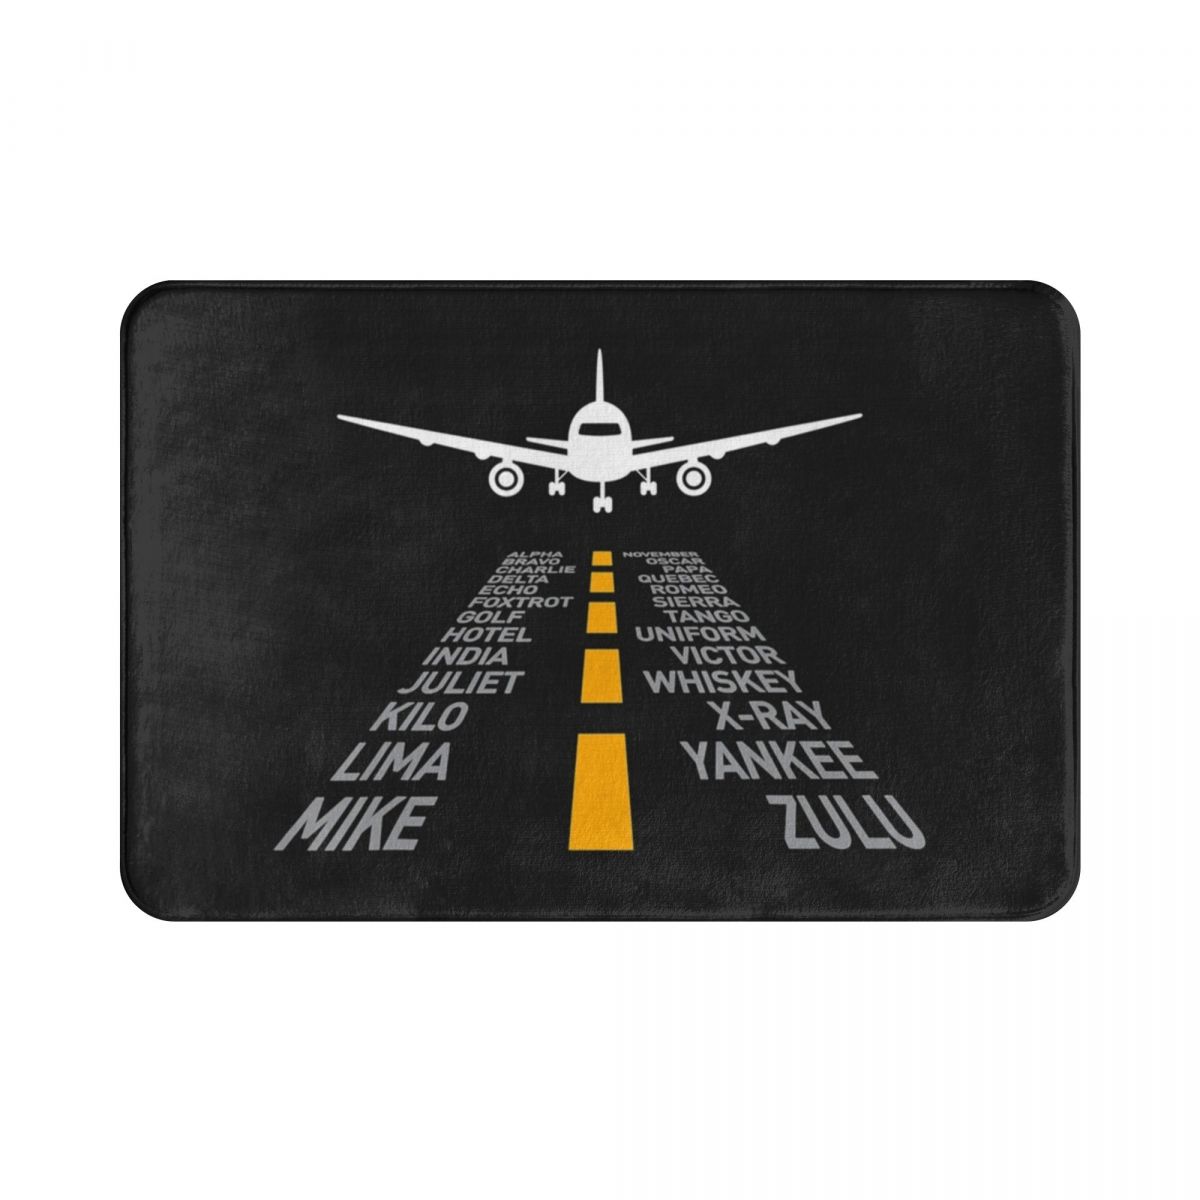 Airplane Landing mat by SB - Style's Bug